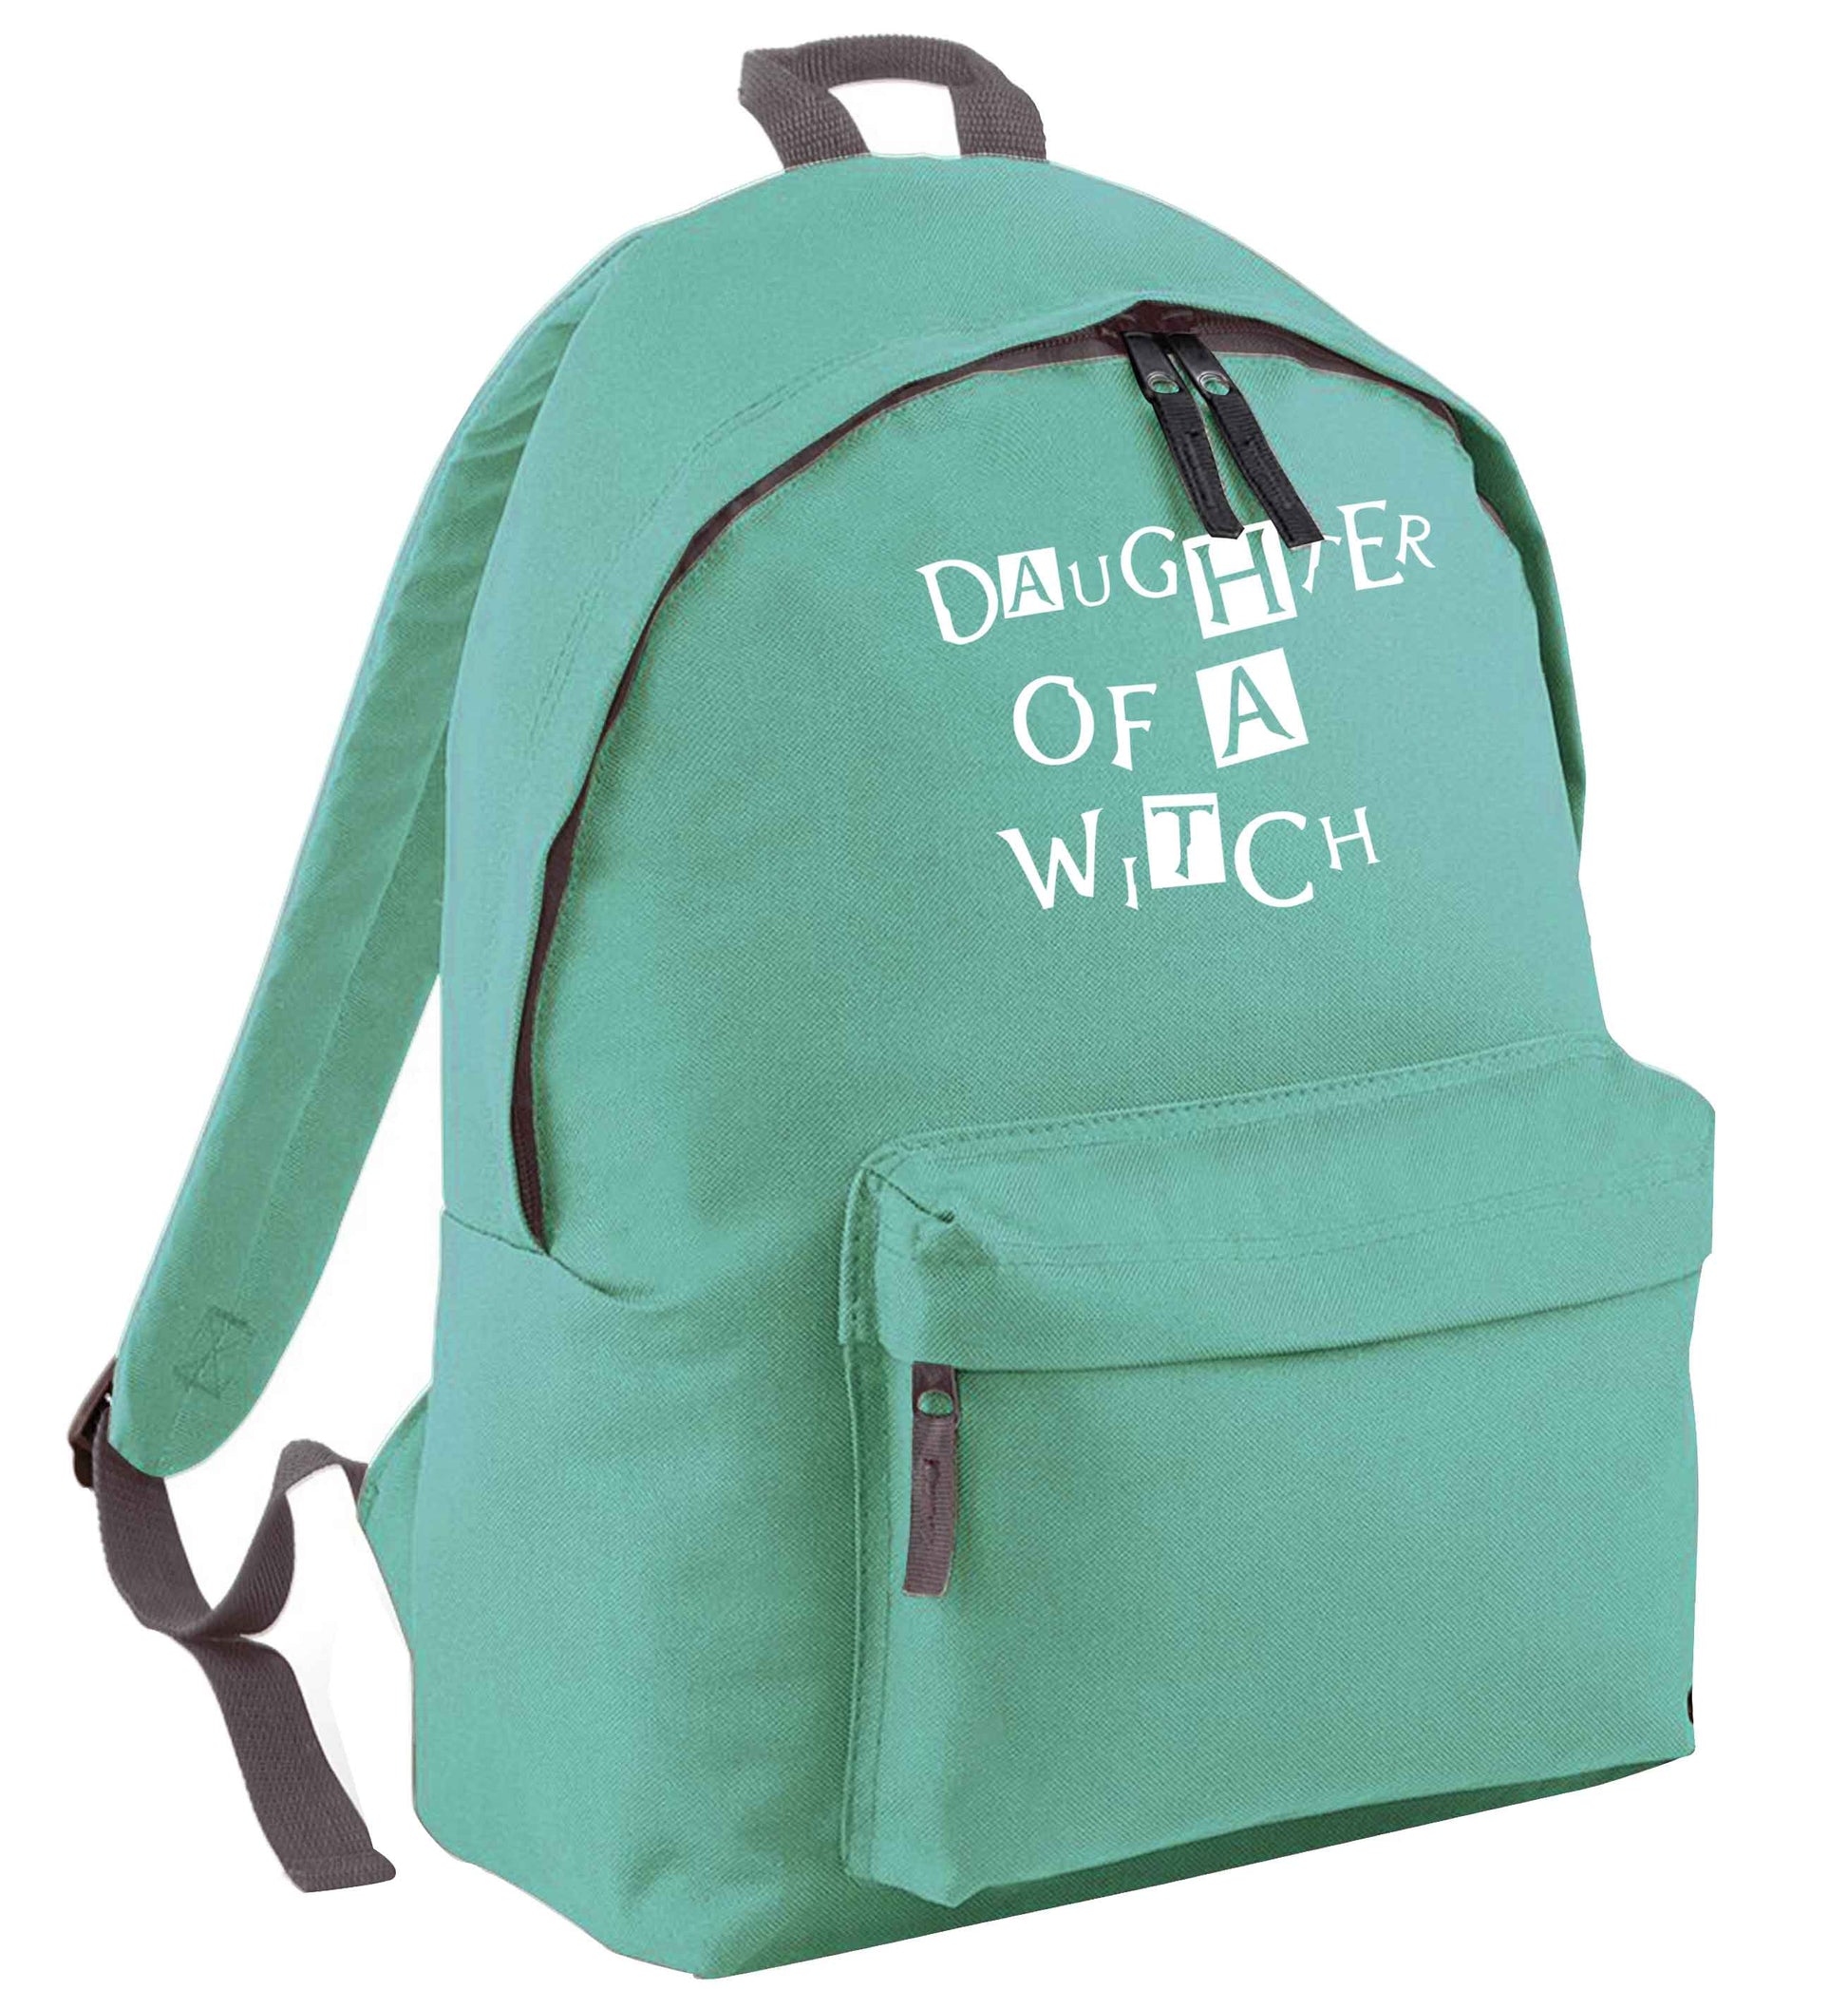 Daughter of a witch mint adults backpack